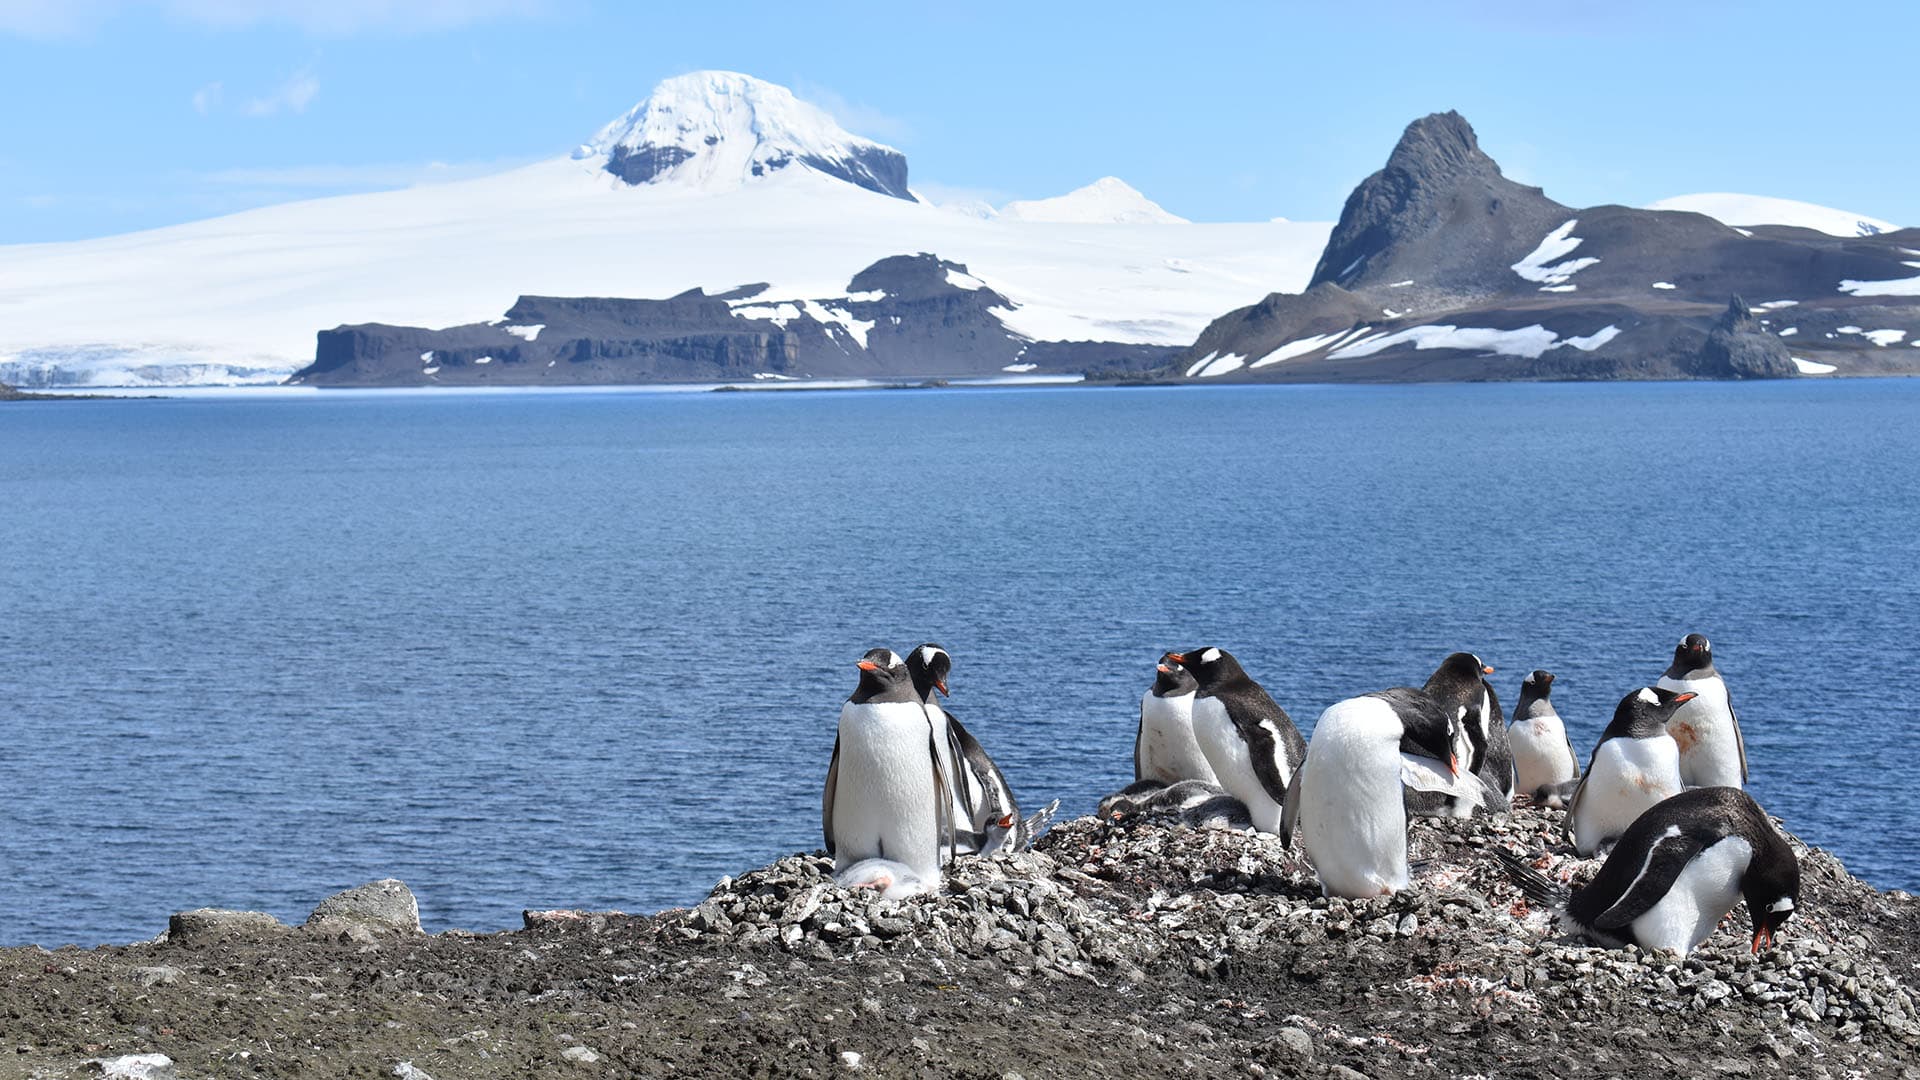 A group of Antarctic penguins stand on an outcrop of rock in front of a body of calm, blue water, with rugged, snow-covered ridges showing the background.